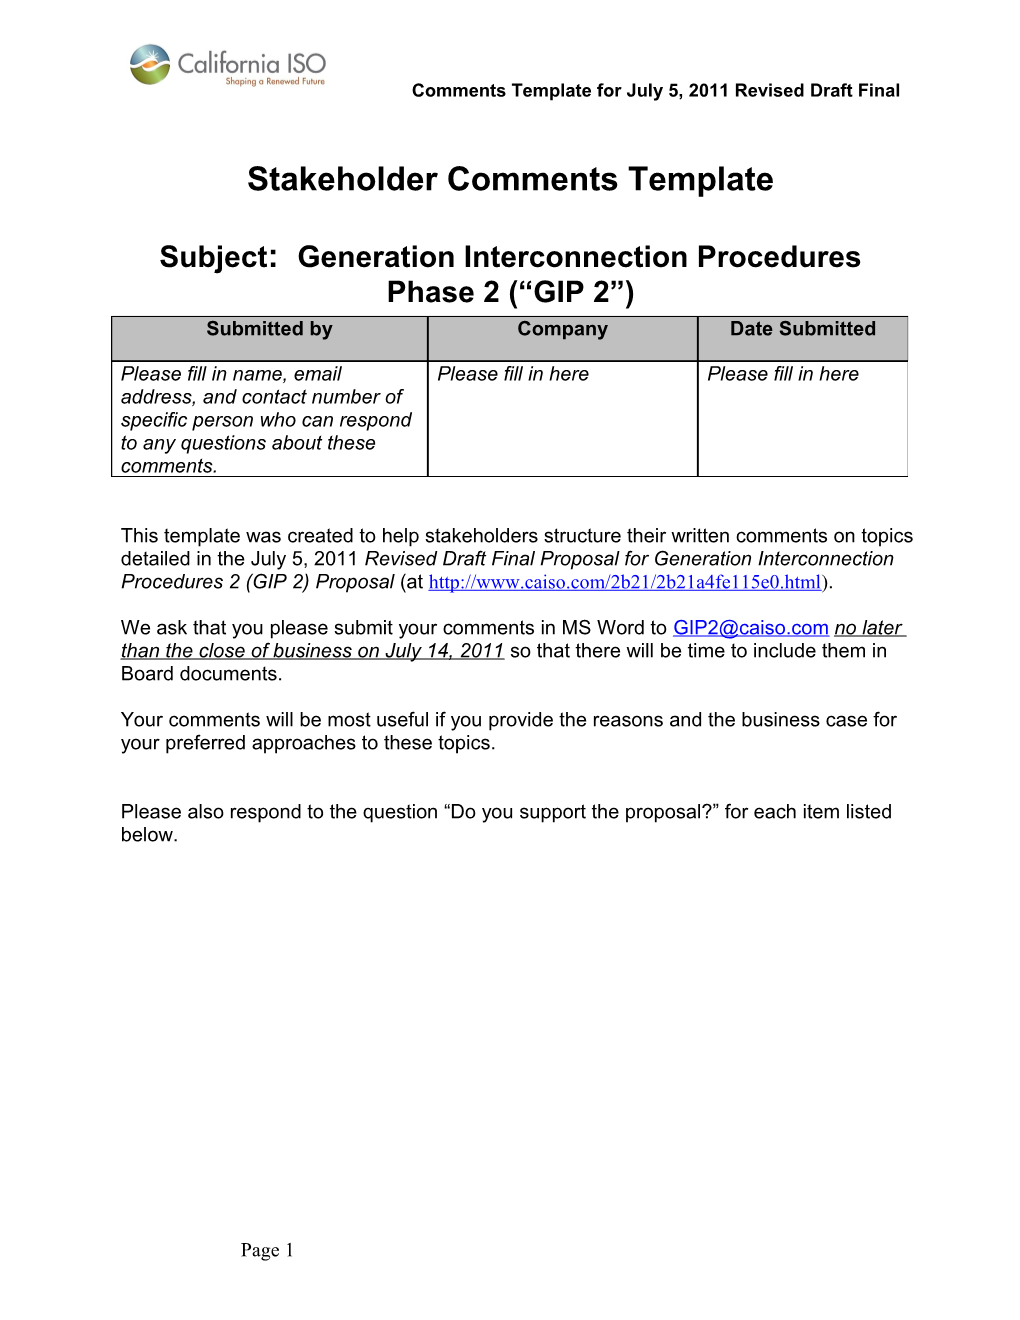 Stakeholder Comments Template - Generator Interconnection Procedures Phase 2 Revised Draft